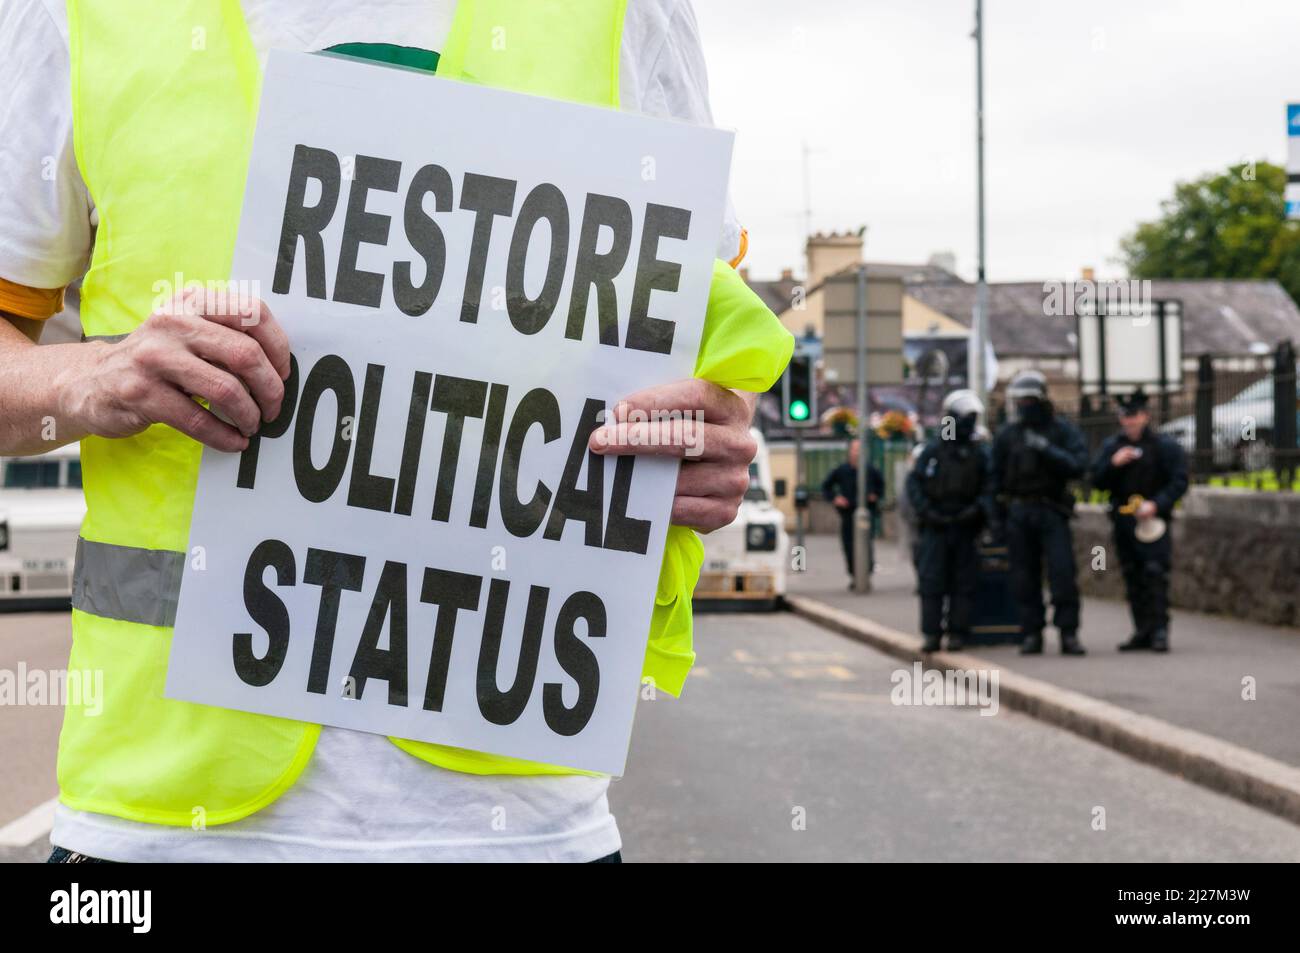 25/07/2010, Lurgan, Northern Ireland. A man holds a protest poster saying 'Restore Political Status' as Families of Republican prisoners in Maghaberry Prison hold an illegal parade through Lurgan. Stock Photo